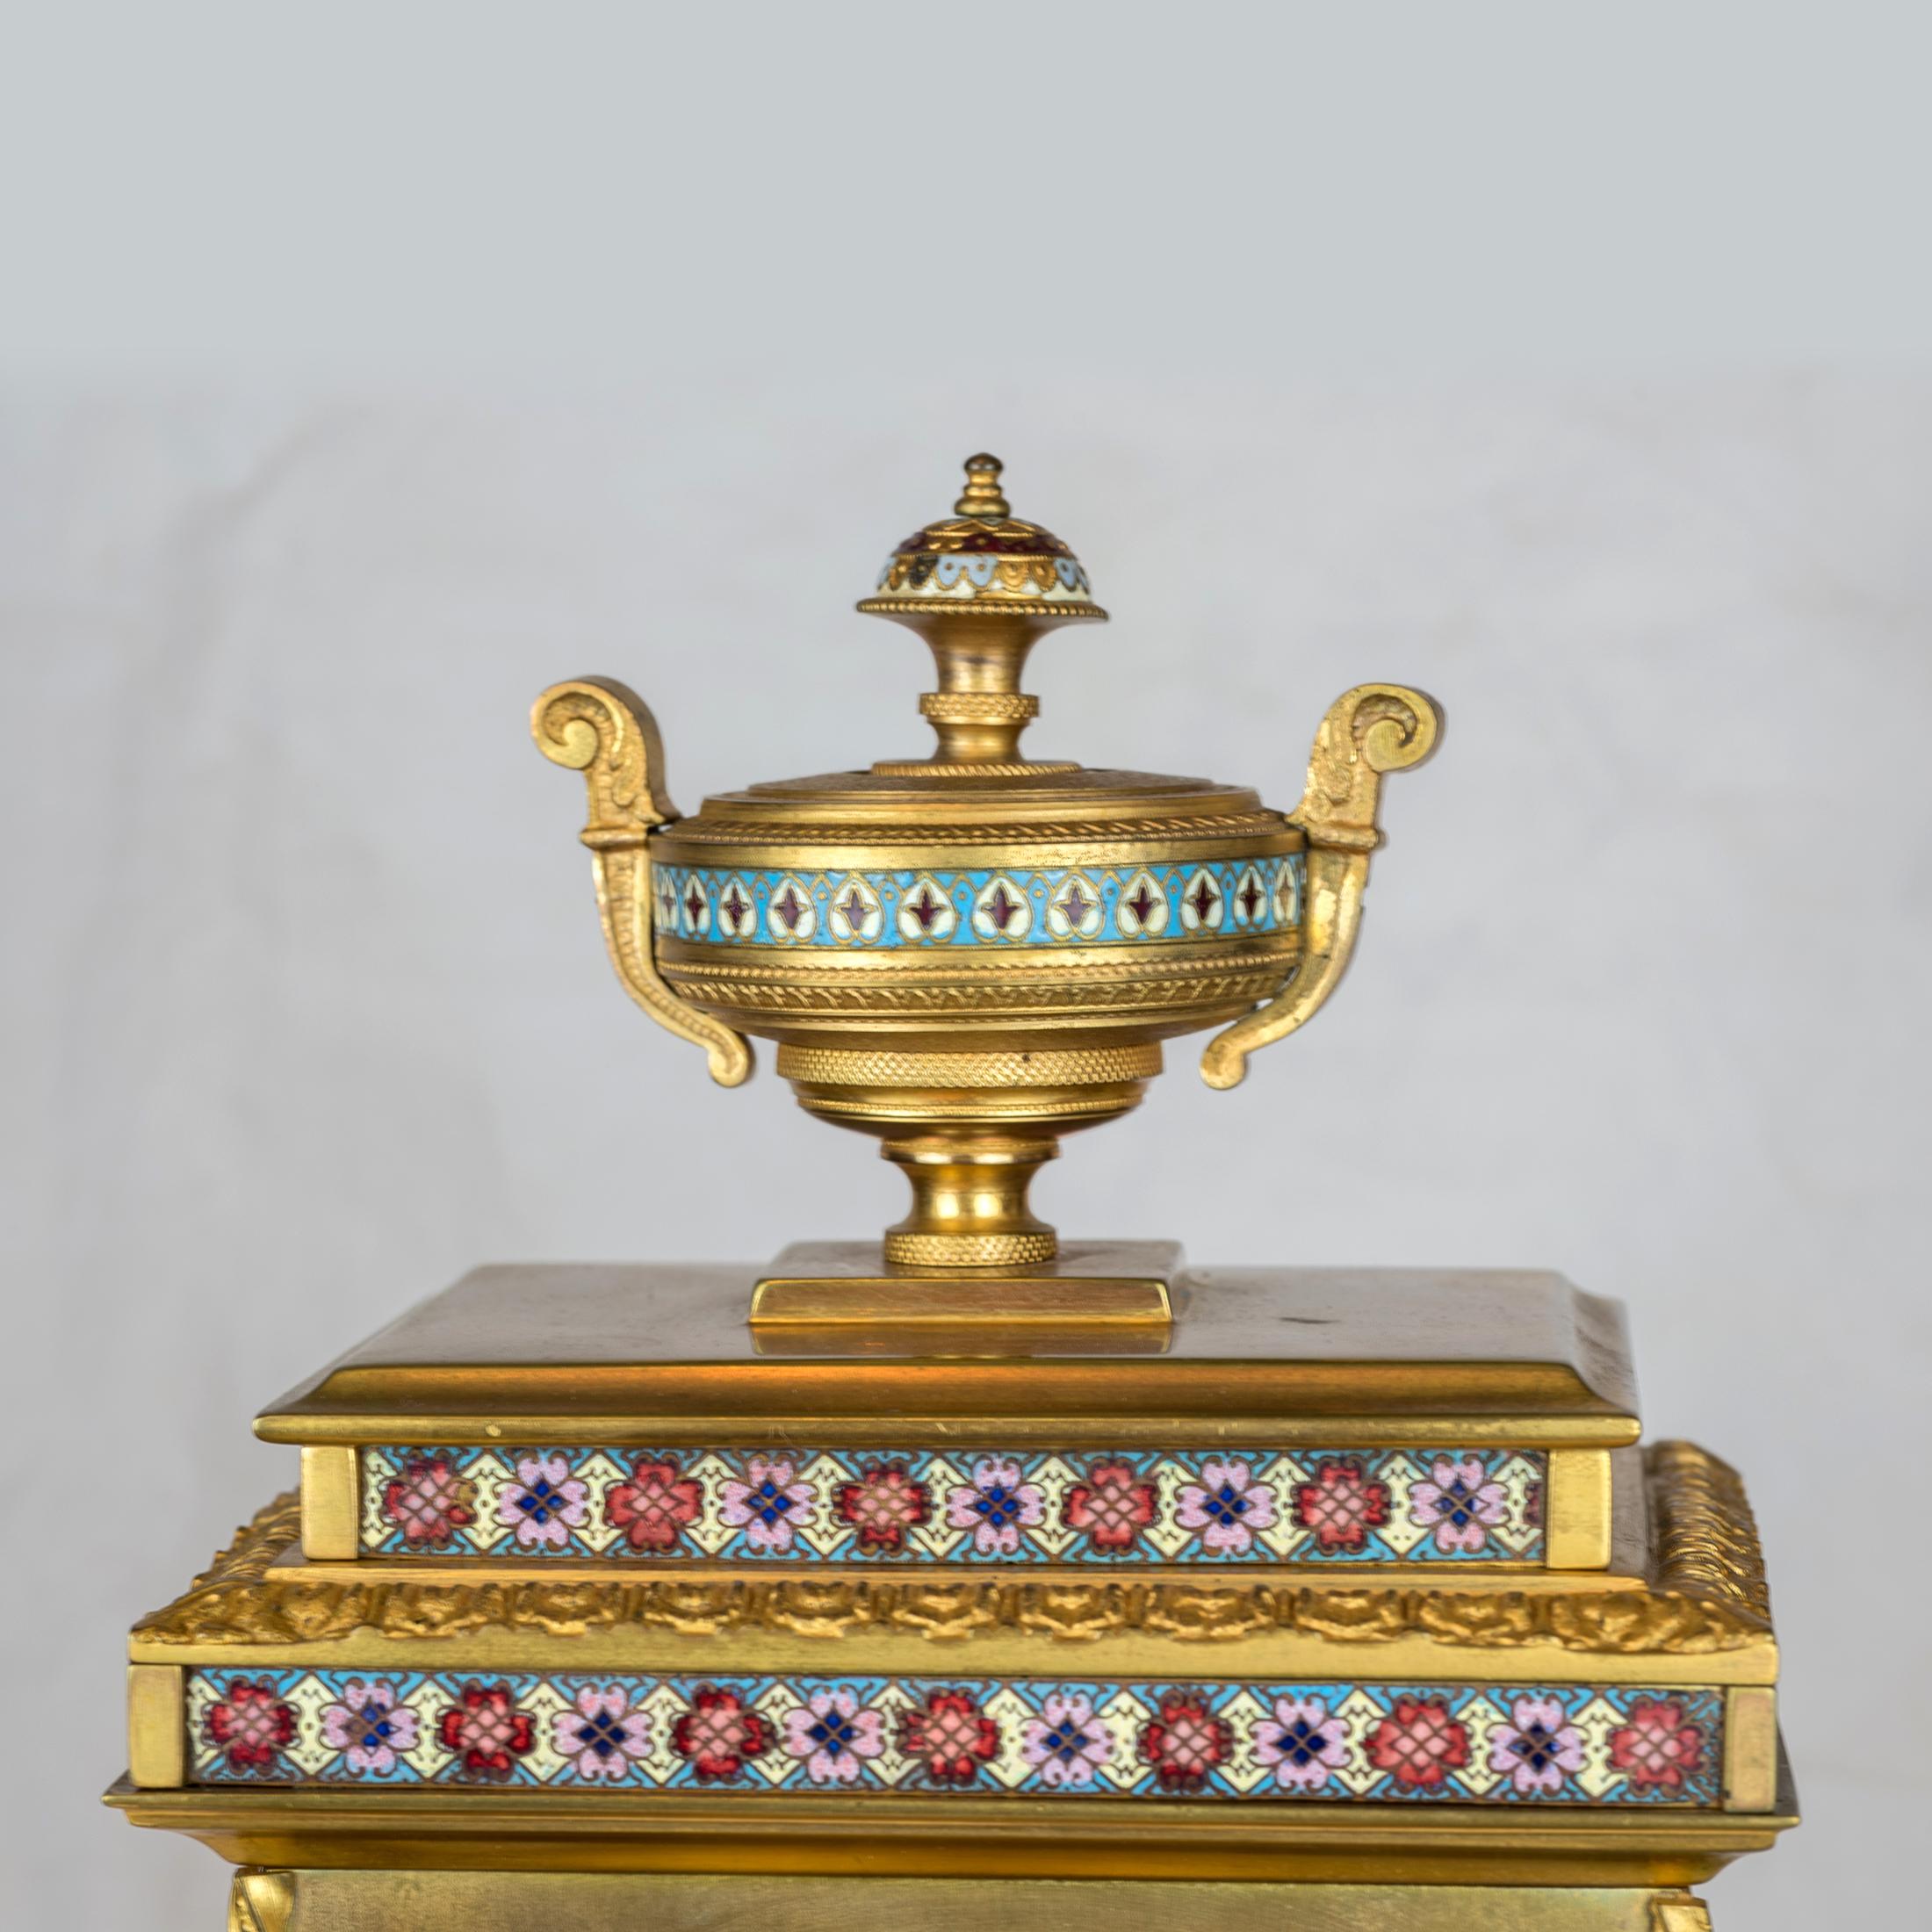 Fabulous Late 19th Century French Champleve Enamel and Gilt-Bronze Mantel Clock For Sale 2